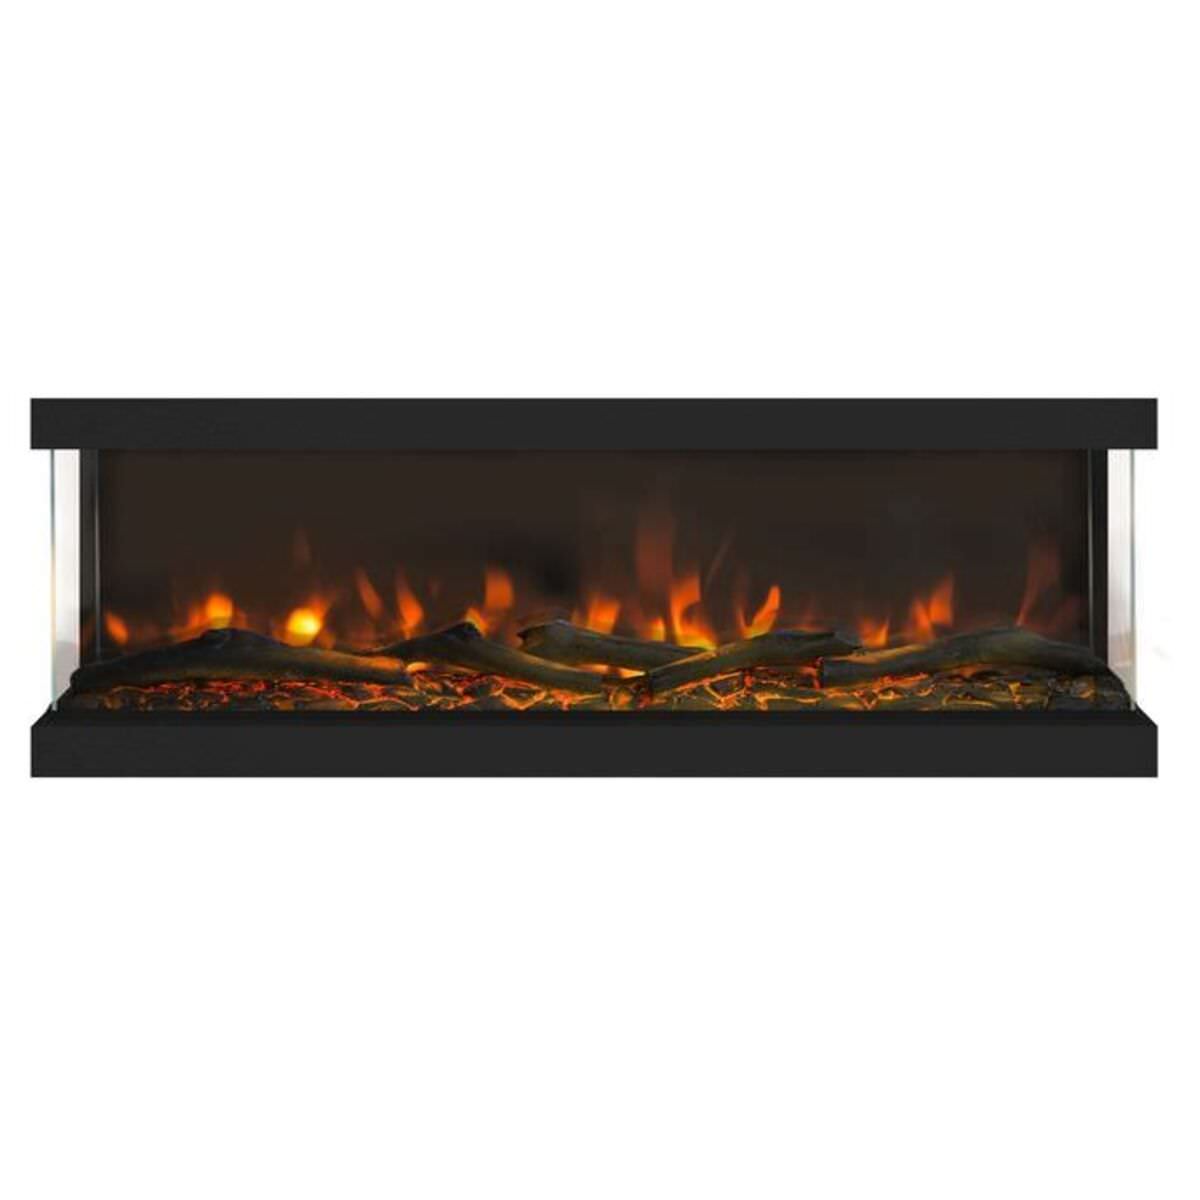 3D LED effect electric fireplace